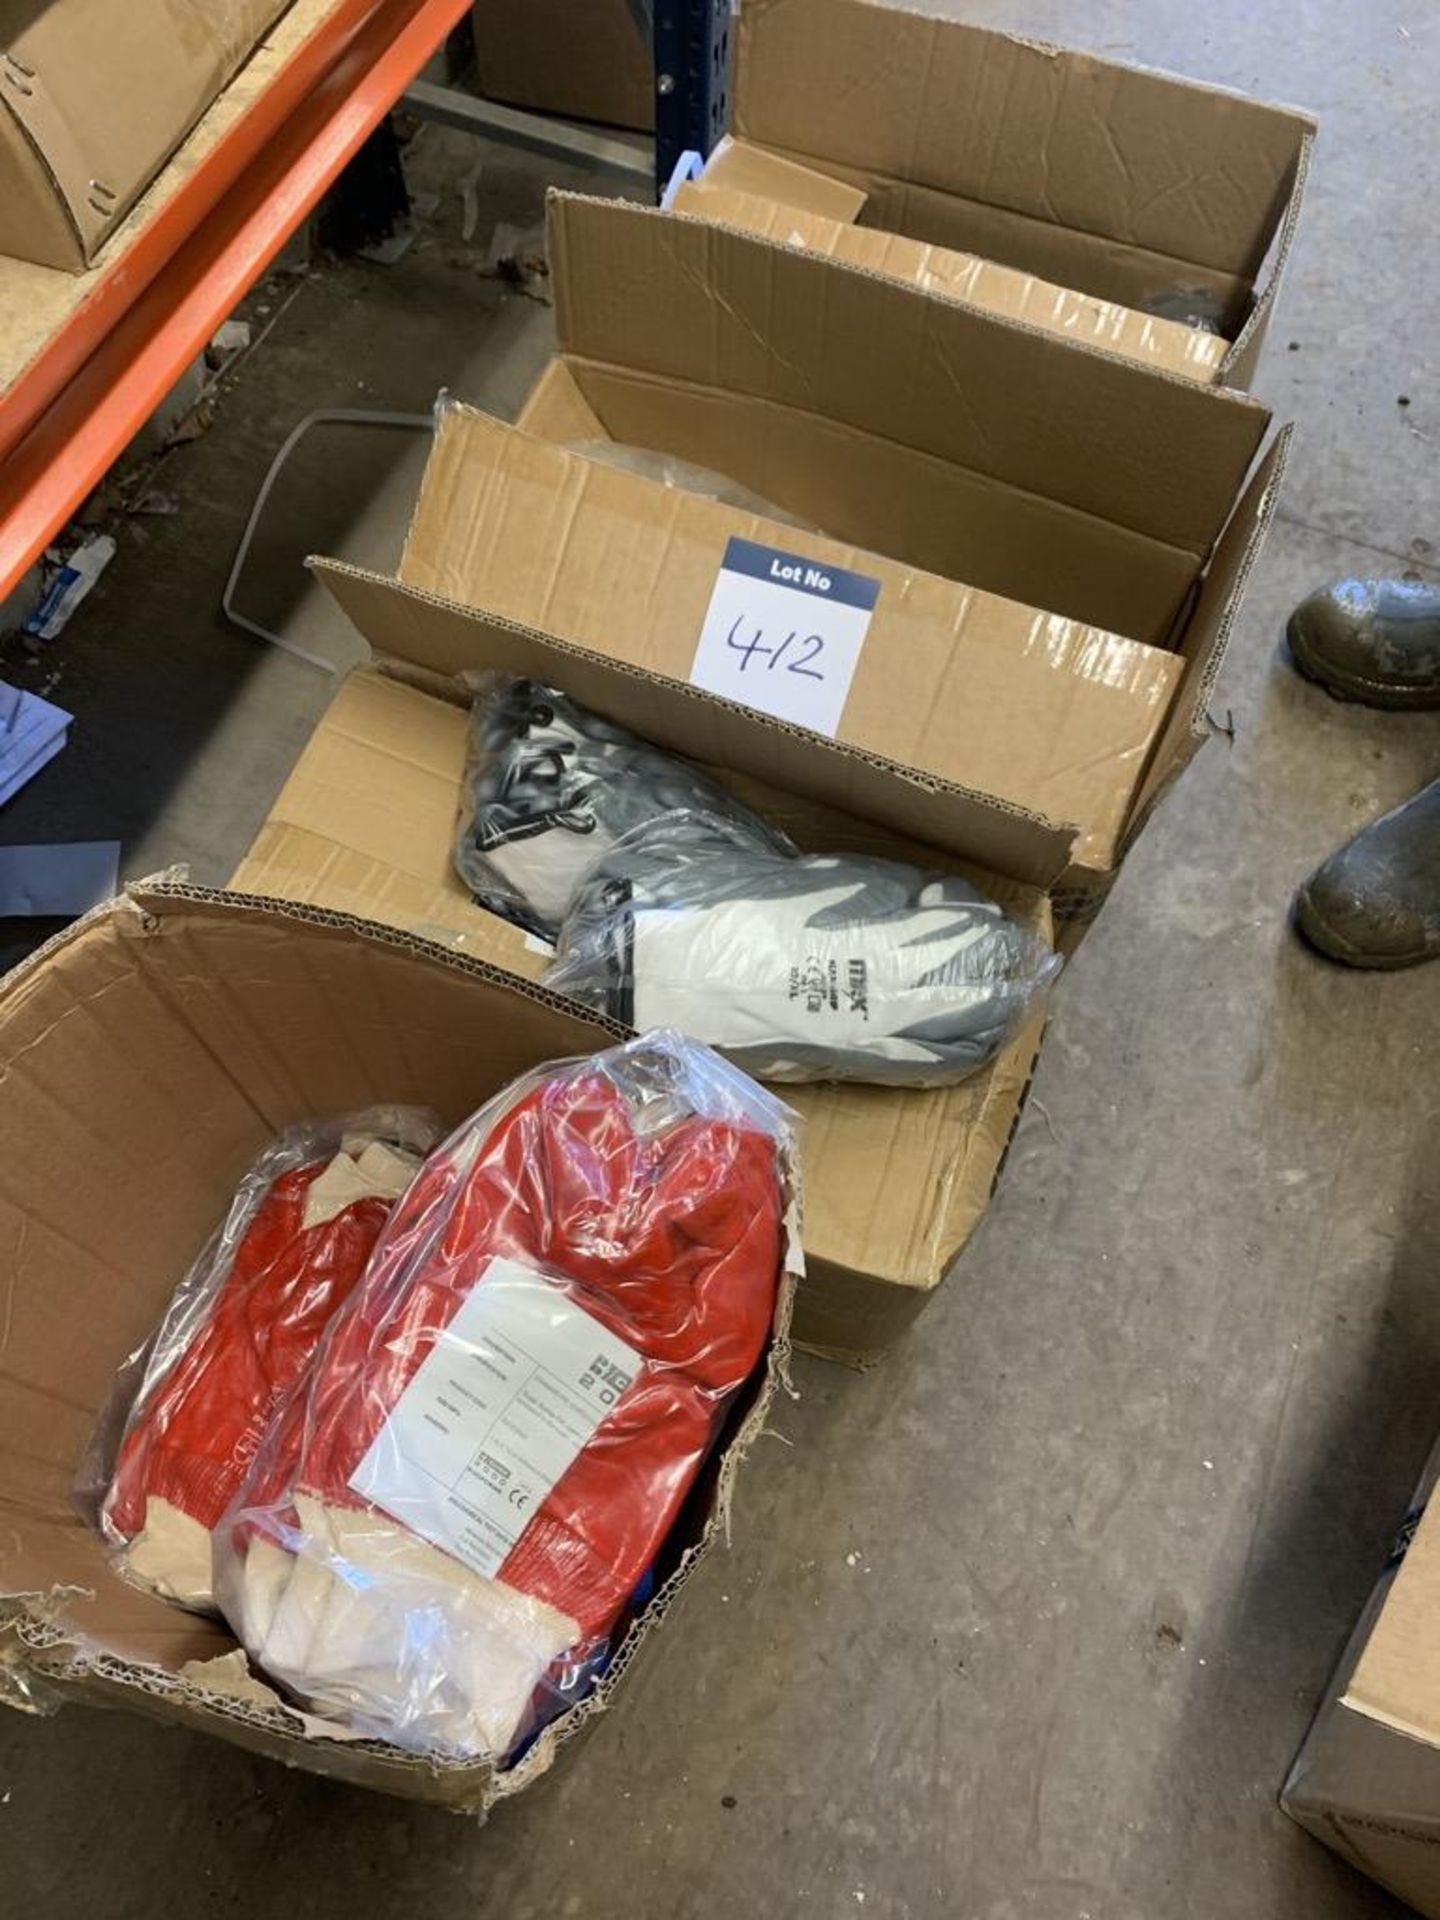 4 part boxes of safety gloves